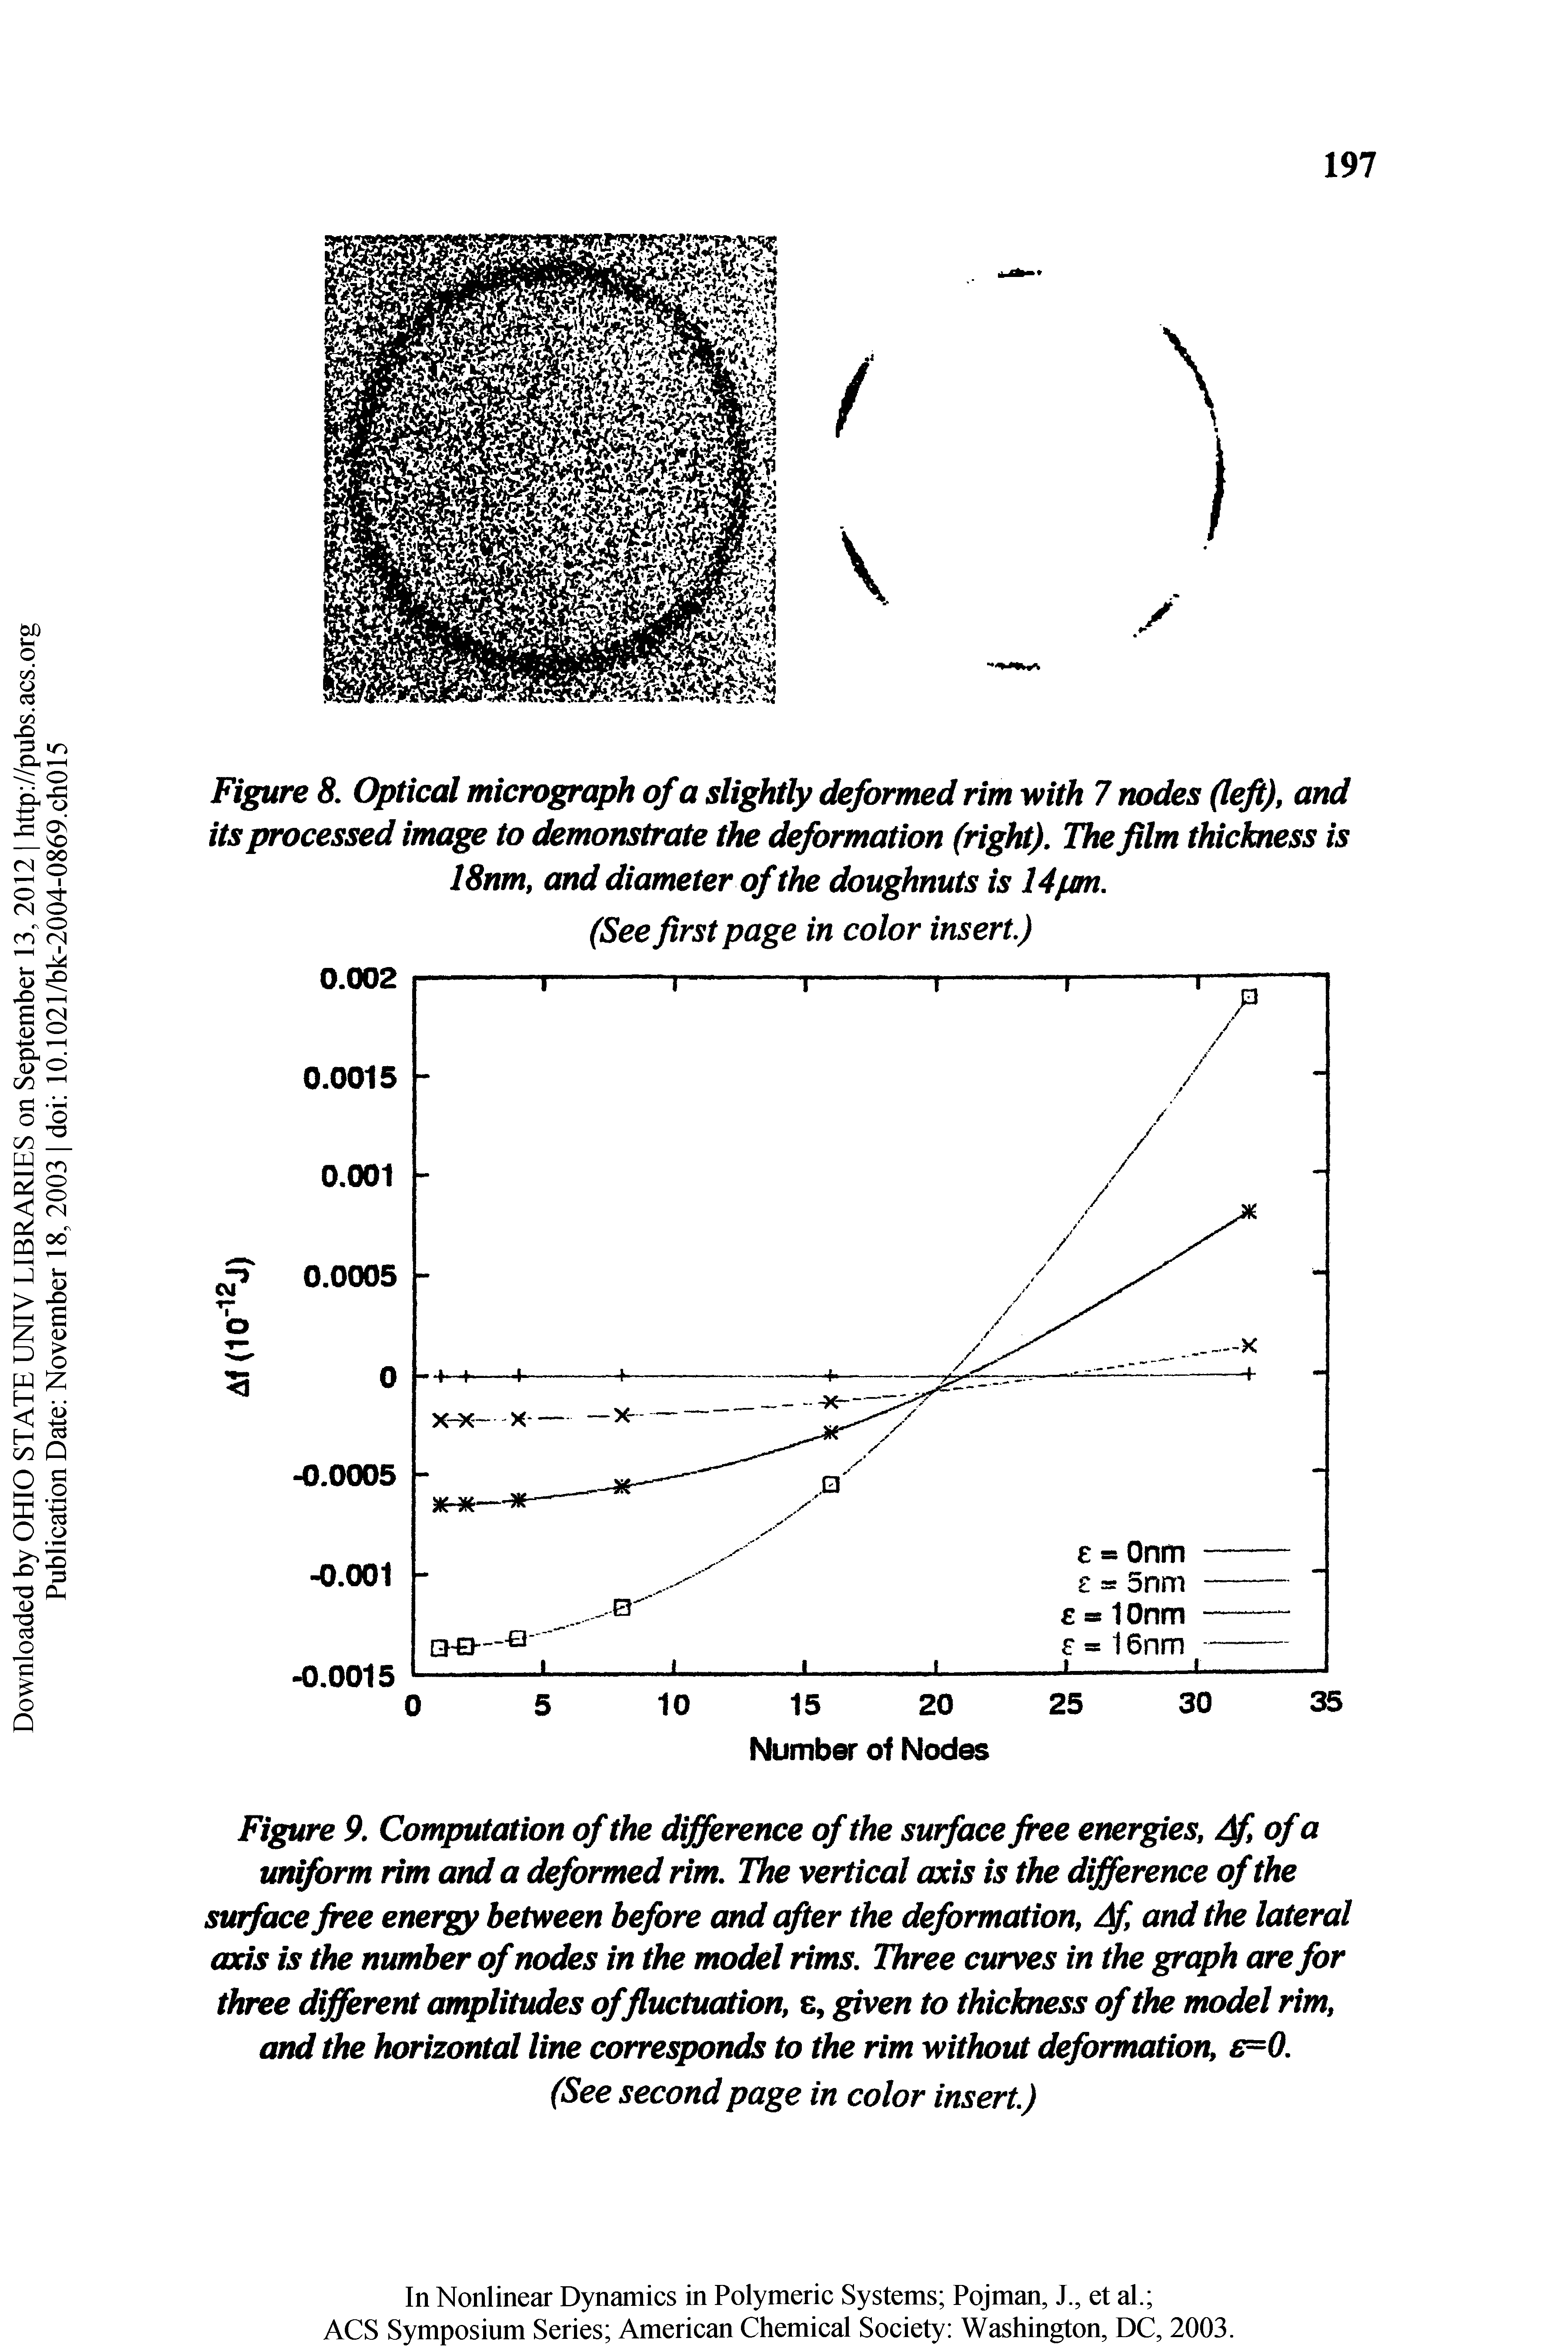 Figure 9. Computation of the difference of the surface free energies, /f, of a uniform rim and a deformed rim. The vertical axis is the difference of the surface free energy between before and after the deformation, /f, and the lateral axis is the number of nodes in the model rims. Three curves in the graph are for three different amplitudes offluctuation, e, given to thickness of the model rim, and the horizontal line corresponds to the rim without deformation, e= 0.